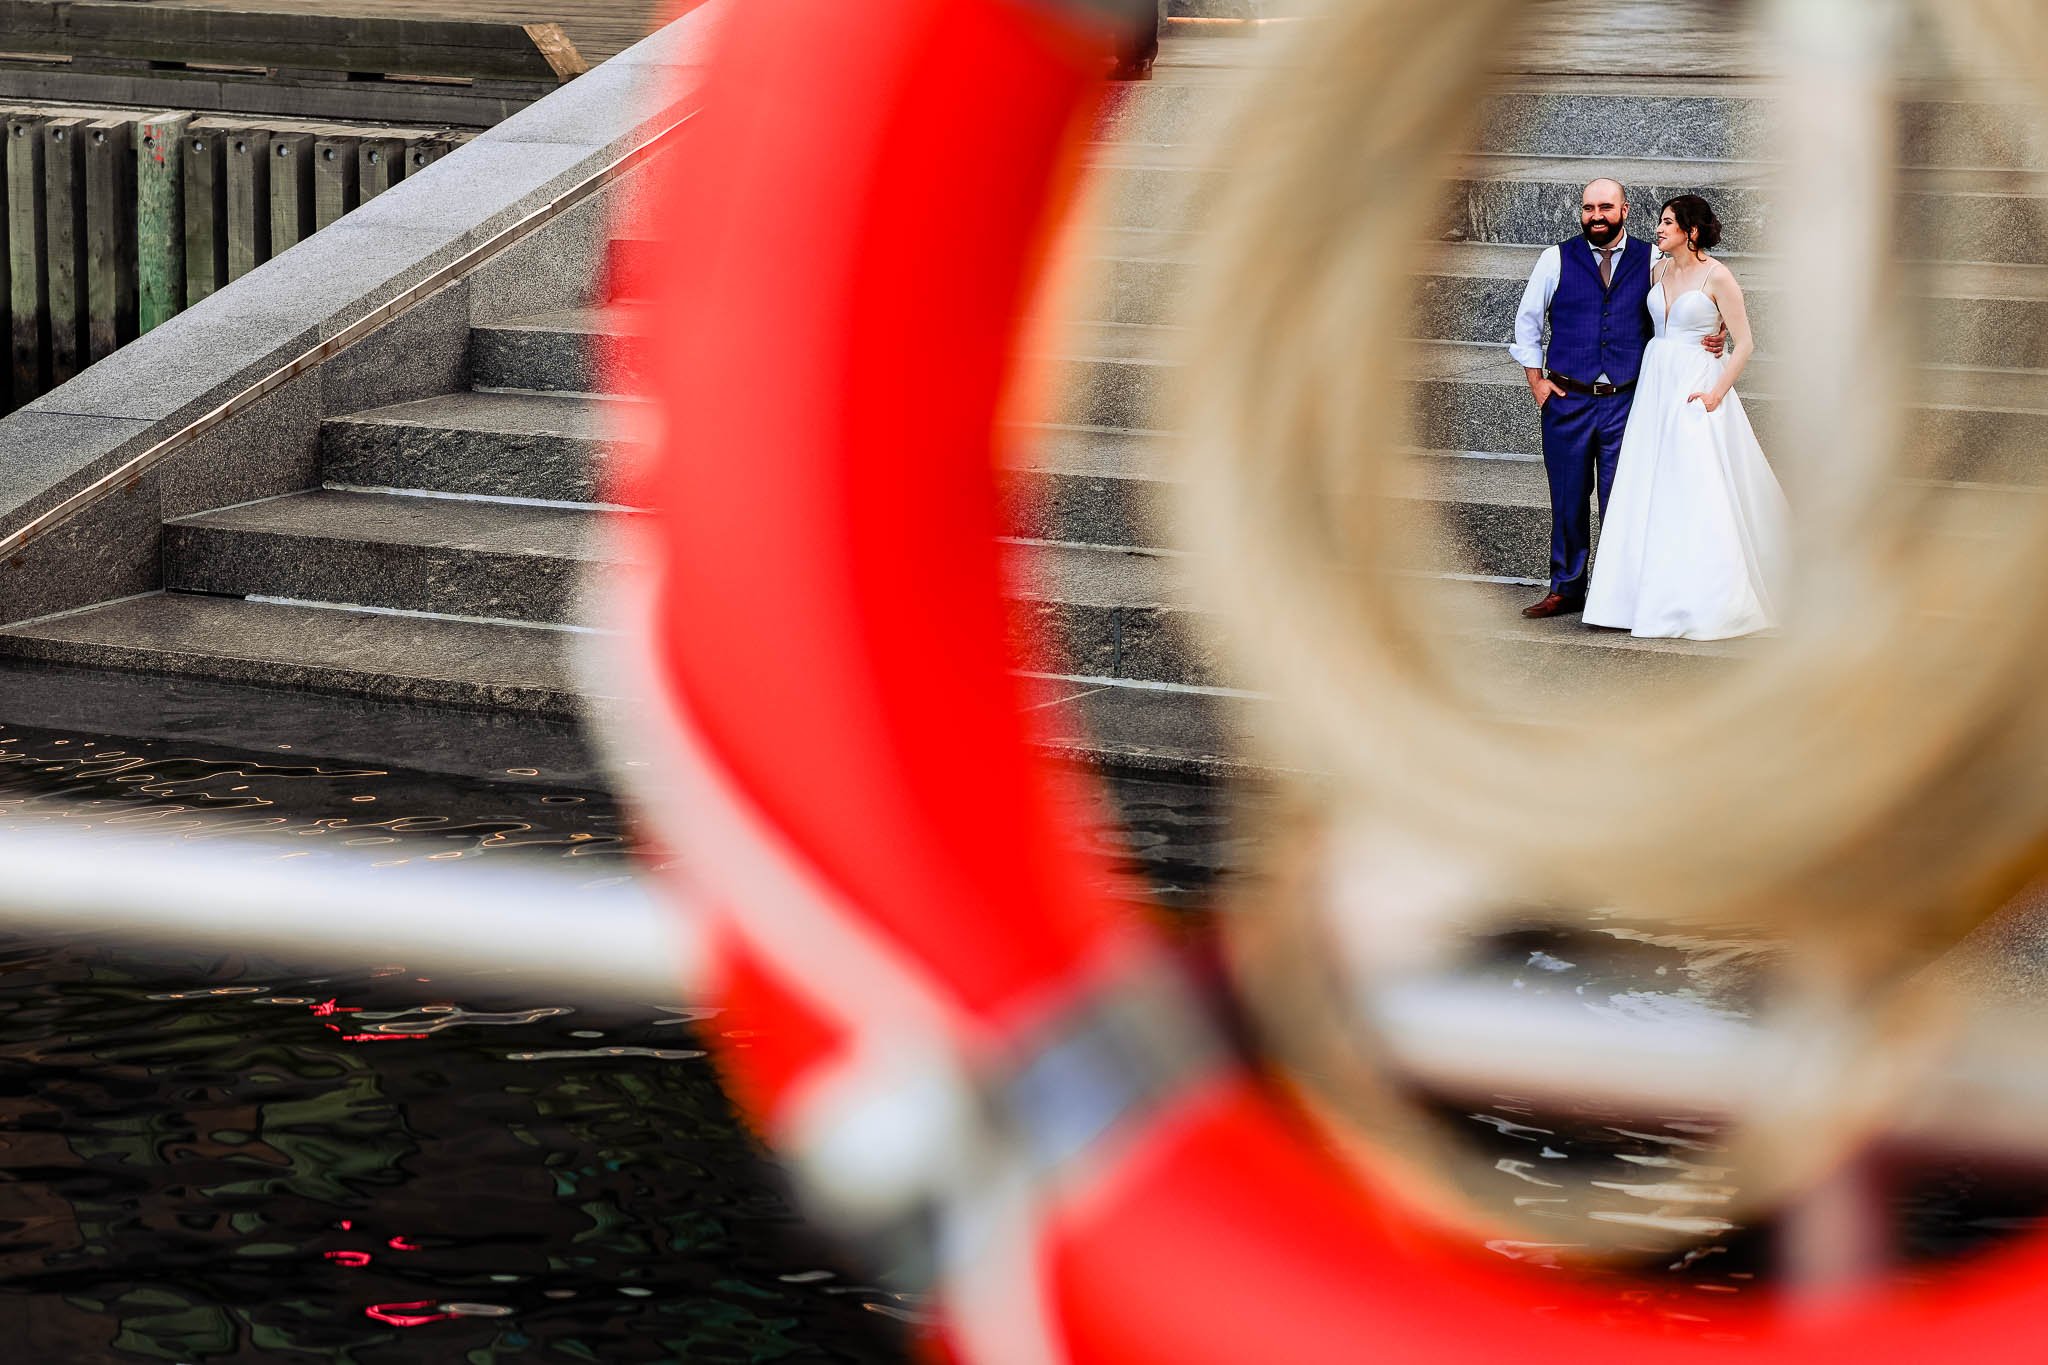 halifax waterfront with bride and groom standing on steps. image has orange lifesaver as a window to look through